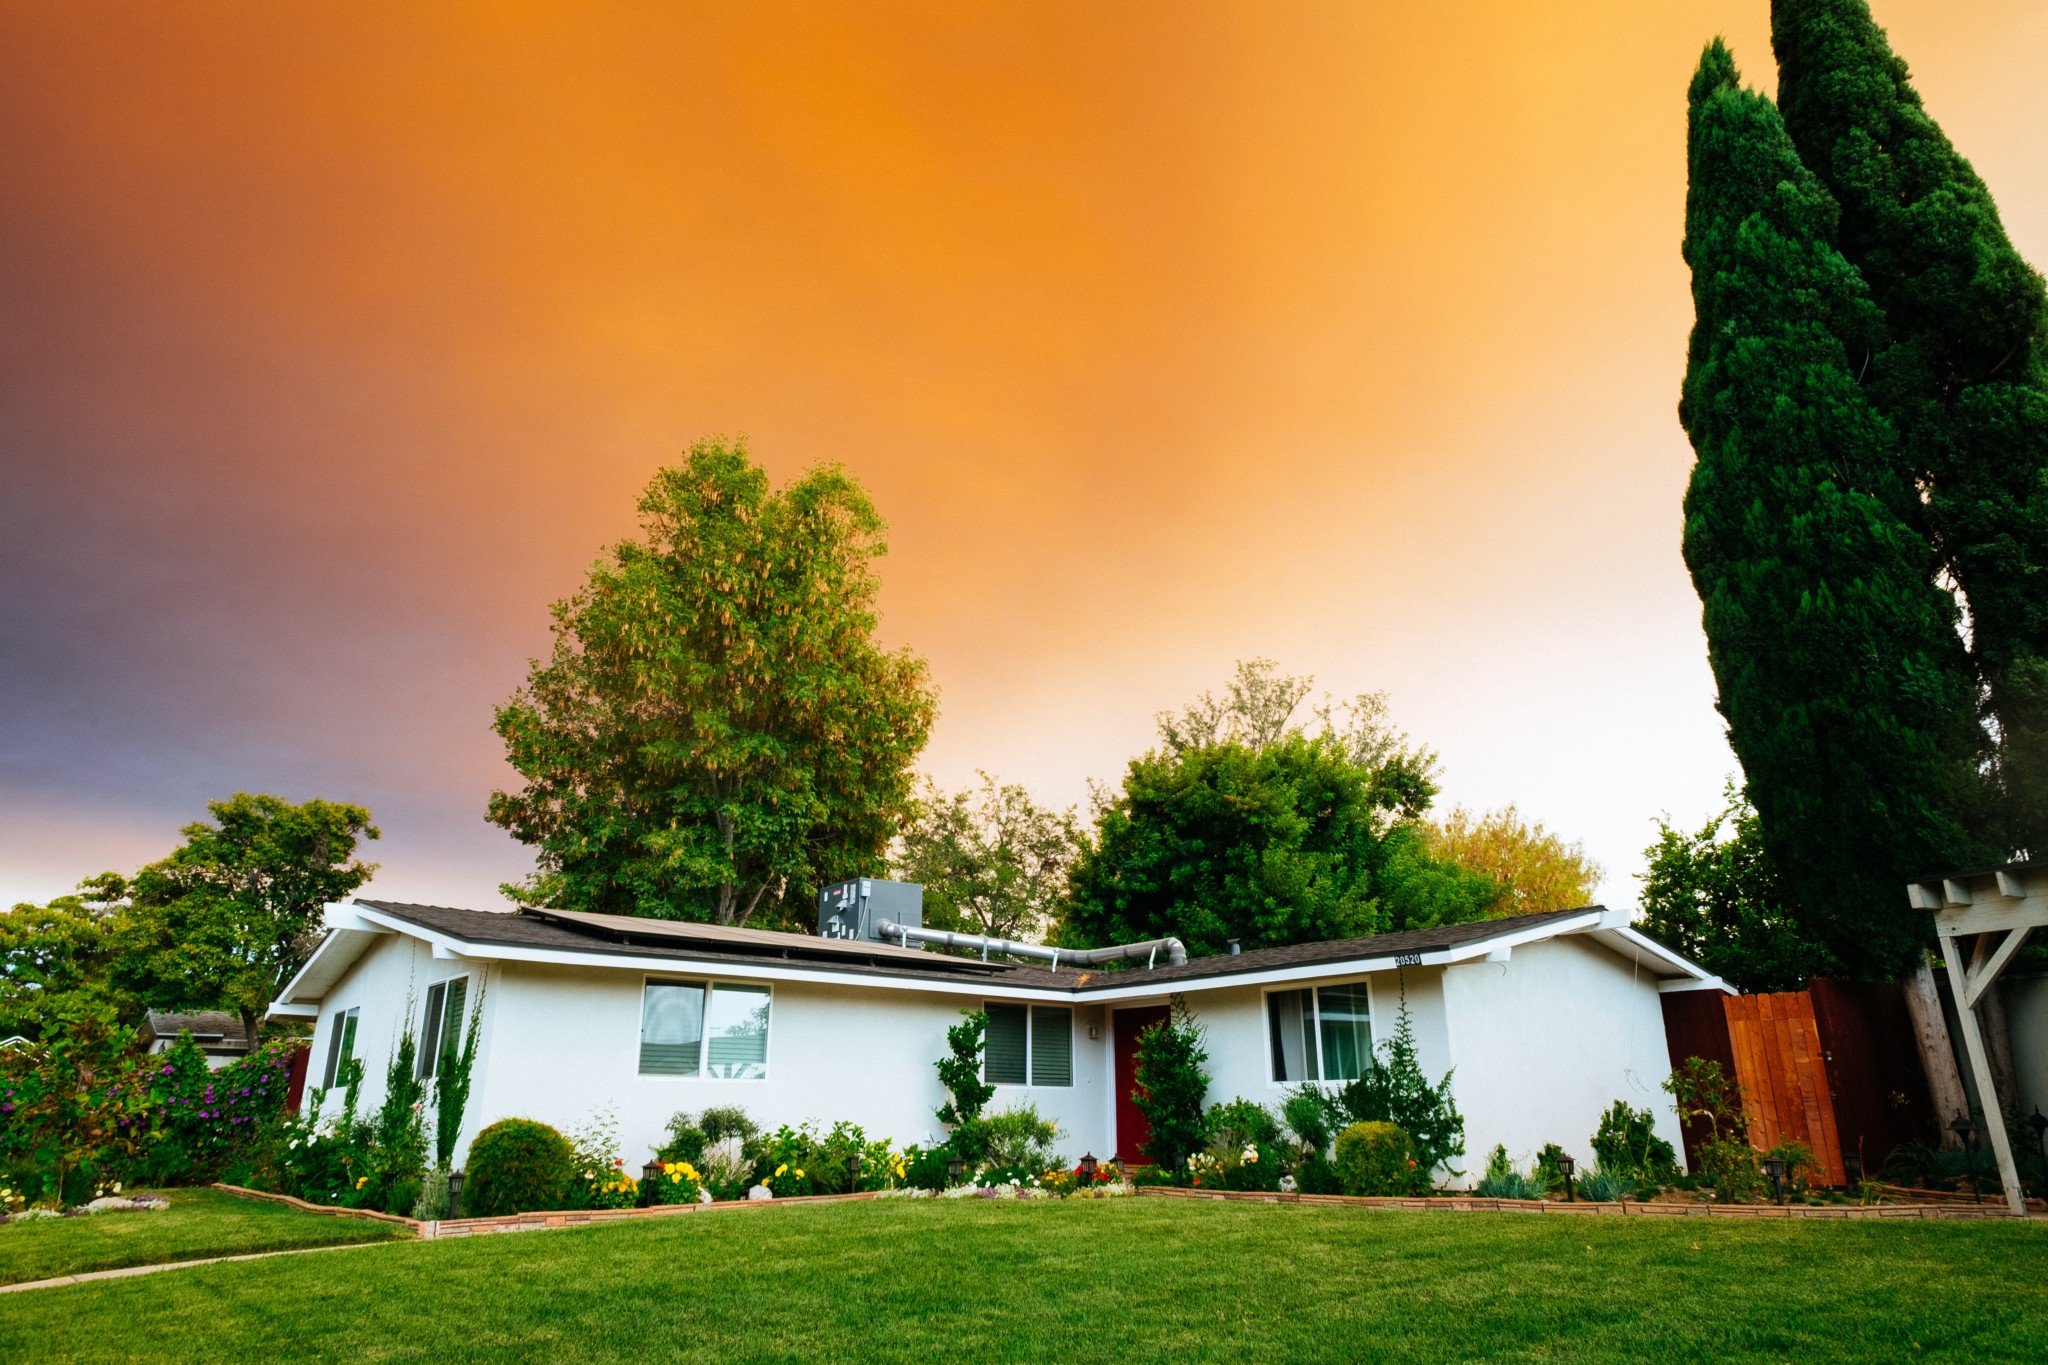 A small white house in a suburban neighborhood surrounded by green trees with an orange sunset in the background